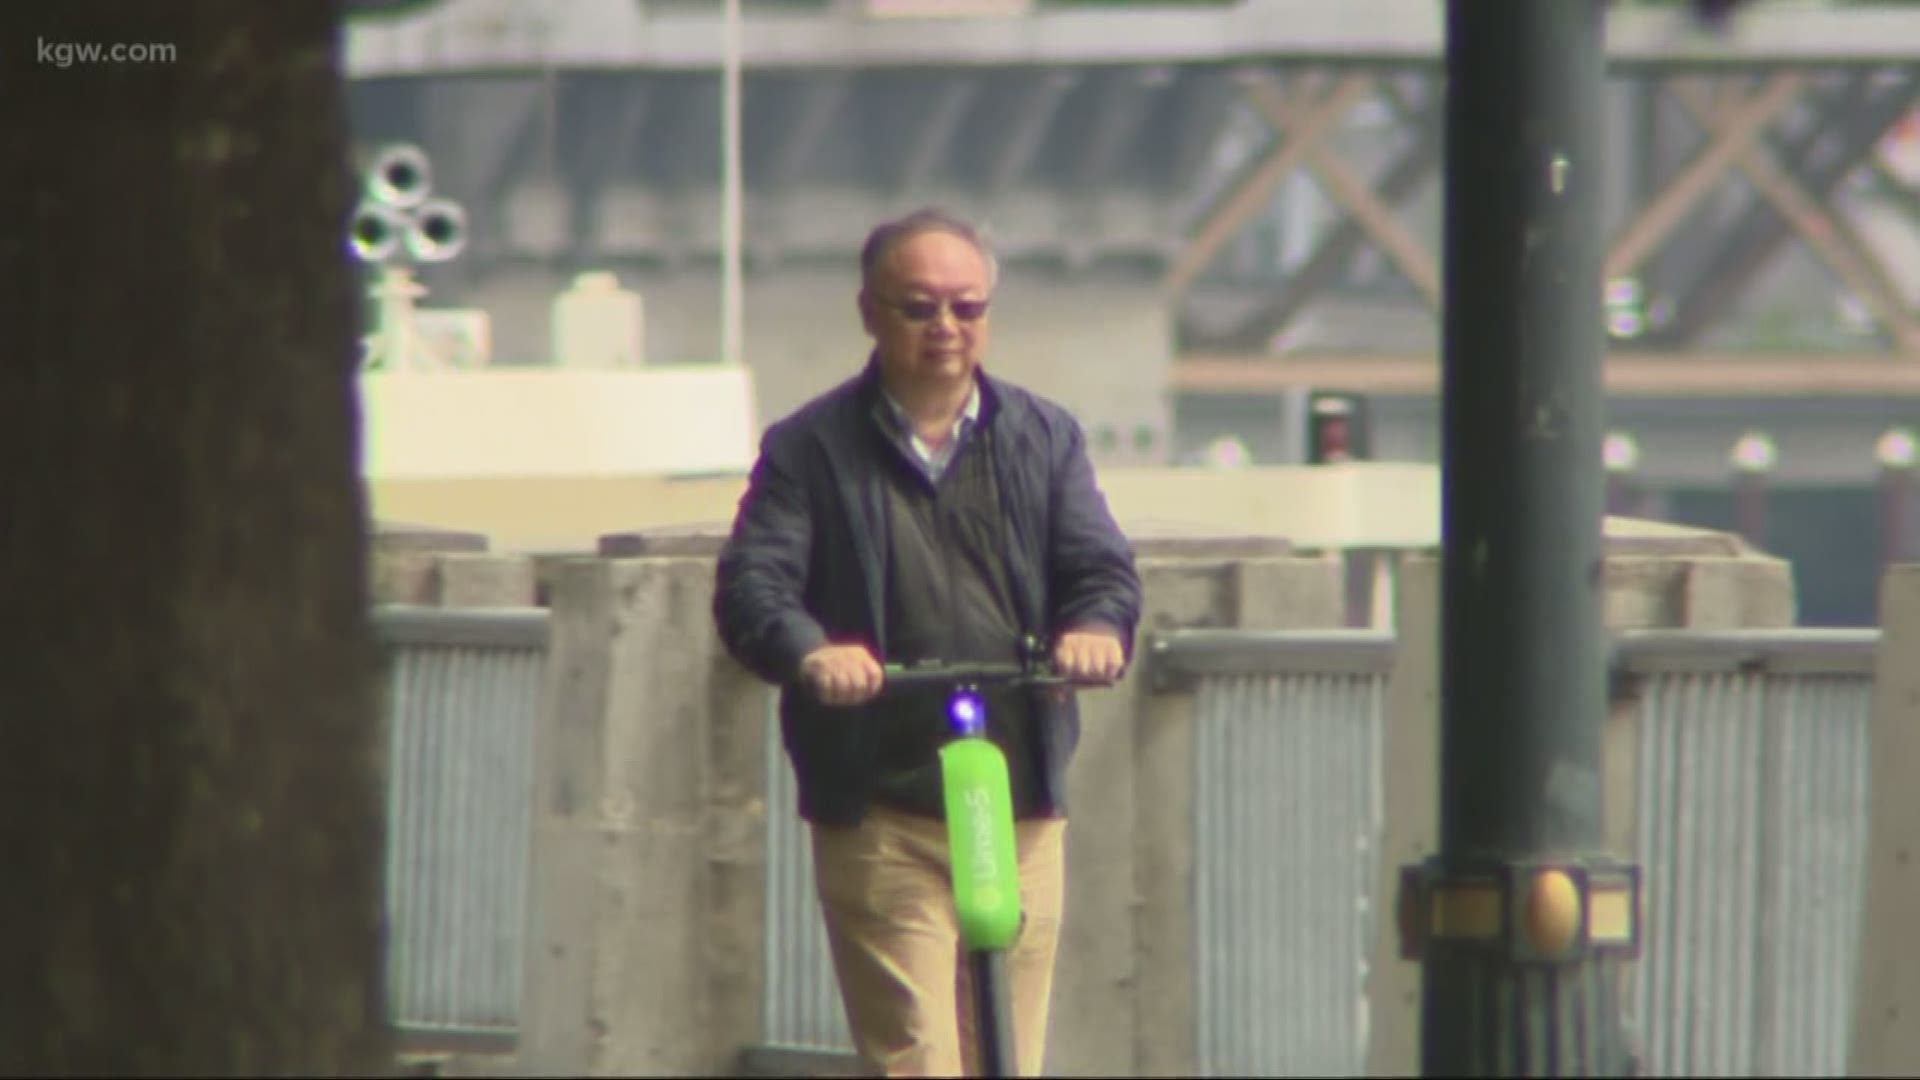 Many scooter riders are not wearing helmets.